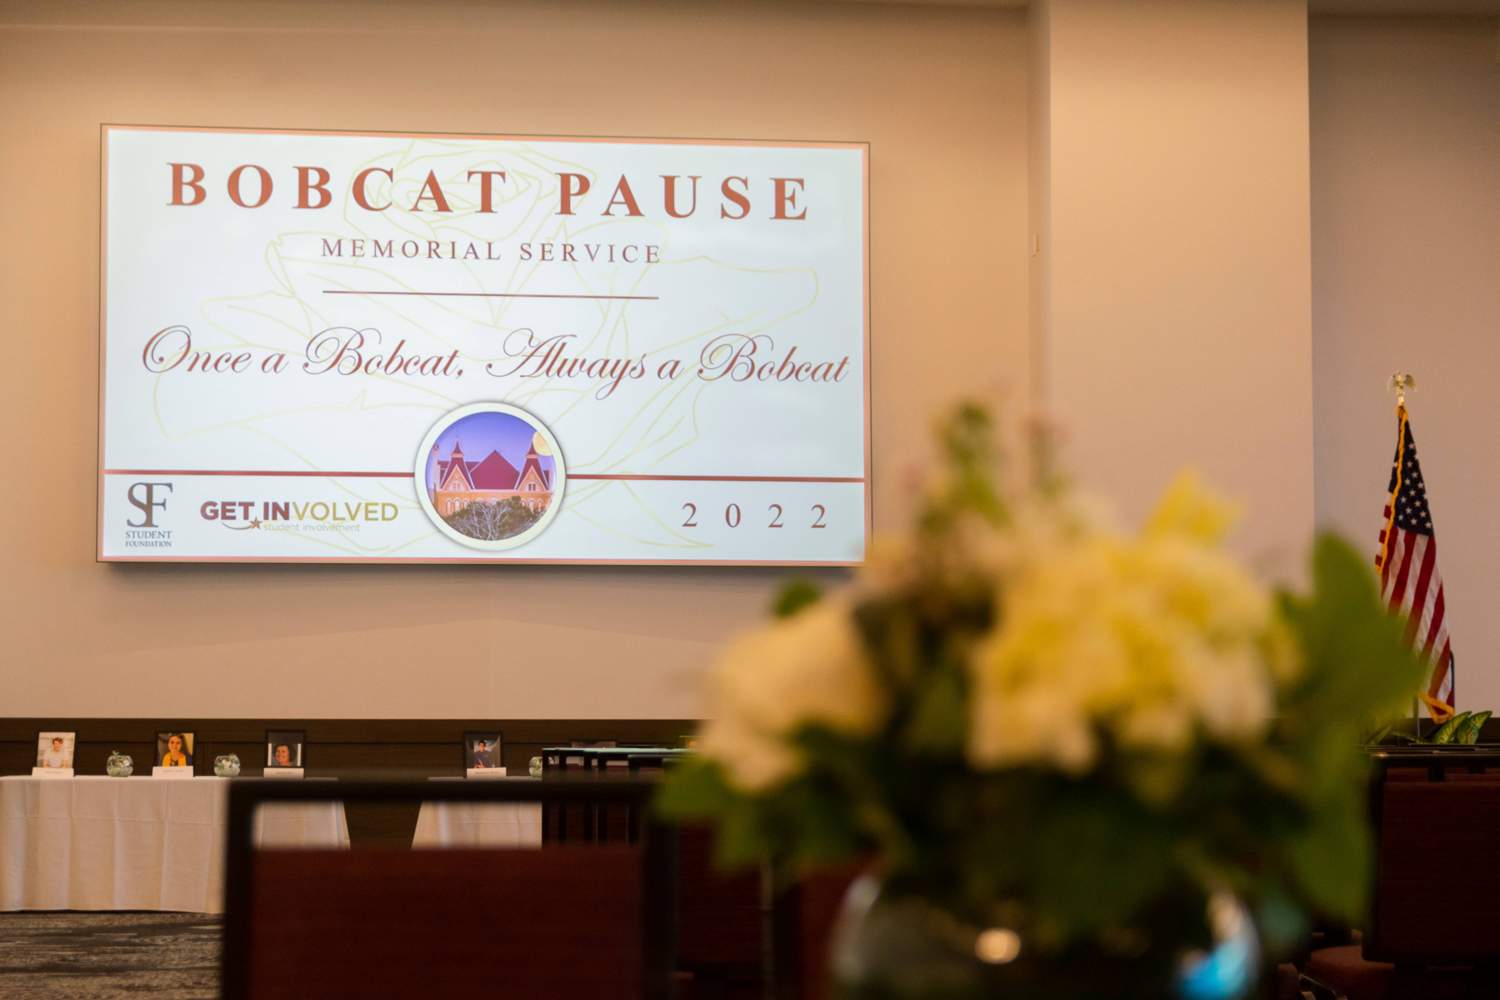 Photo of flowers in the foreground with screen presenting Bobcat Pause opening powerpoint slide in background